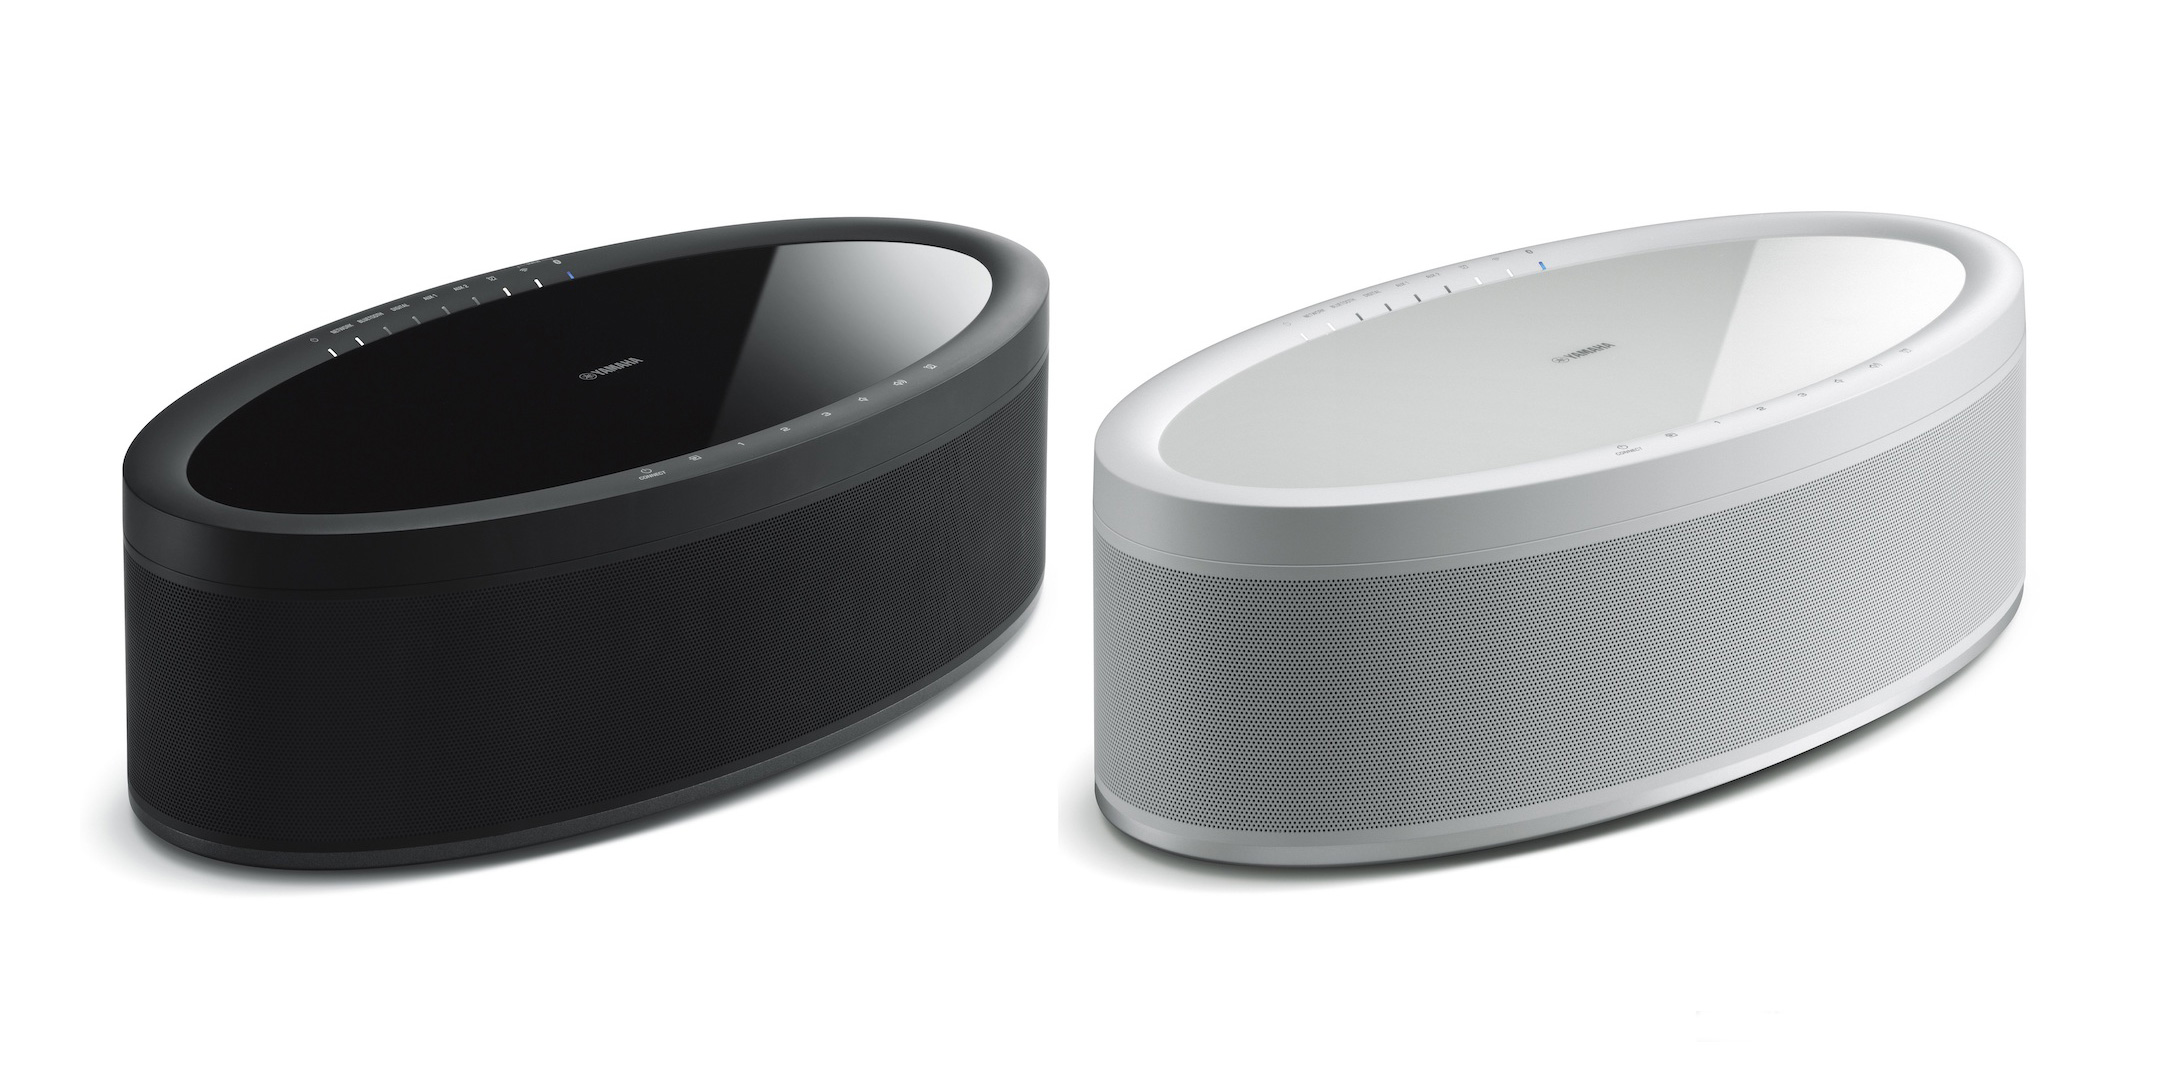 Pic showing two Yamaha Musiccast 50 Wireless Speakers. One white and one black